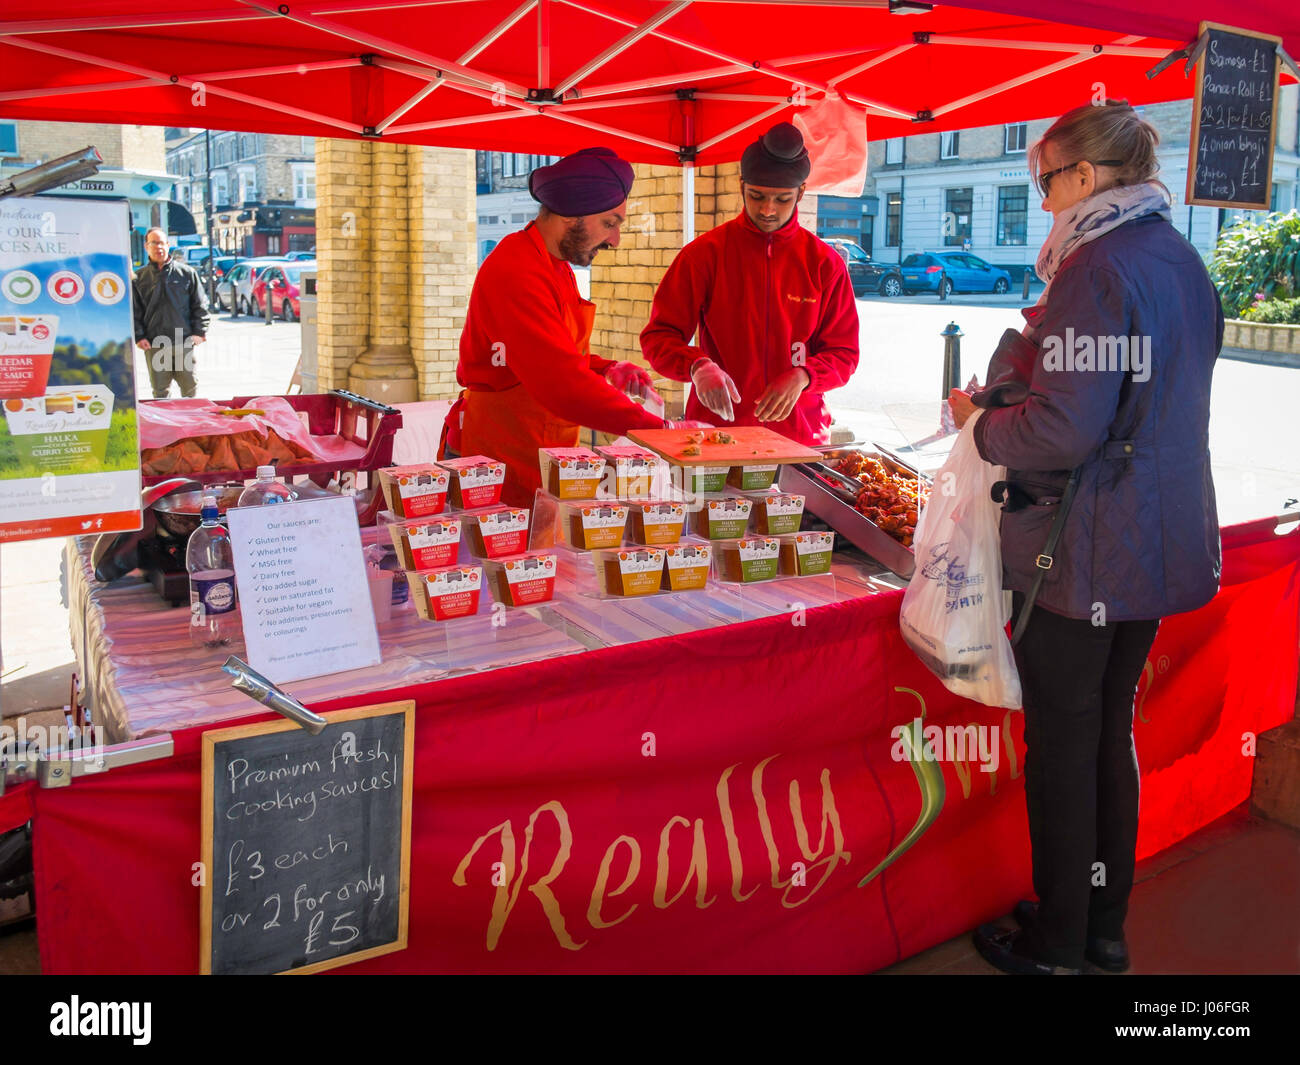 An woman buying Indian Food from Sikh  stall holders at a UK Farmer's market serving Curry Sauces and cooked 'Really Indian' food Stock Photo